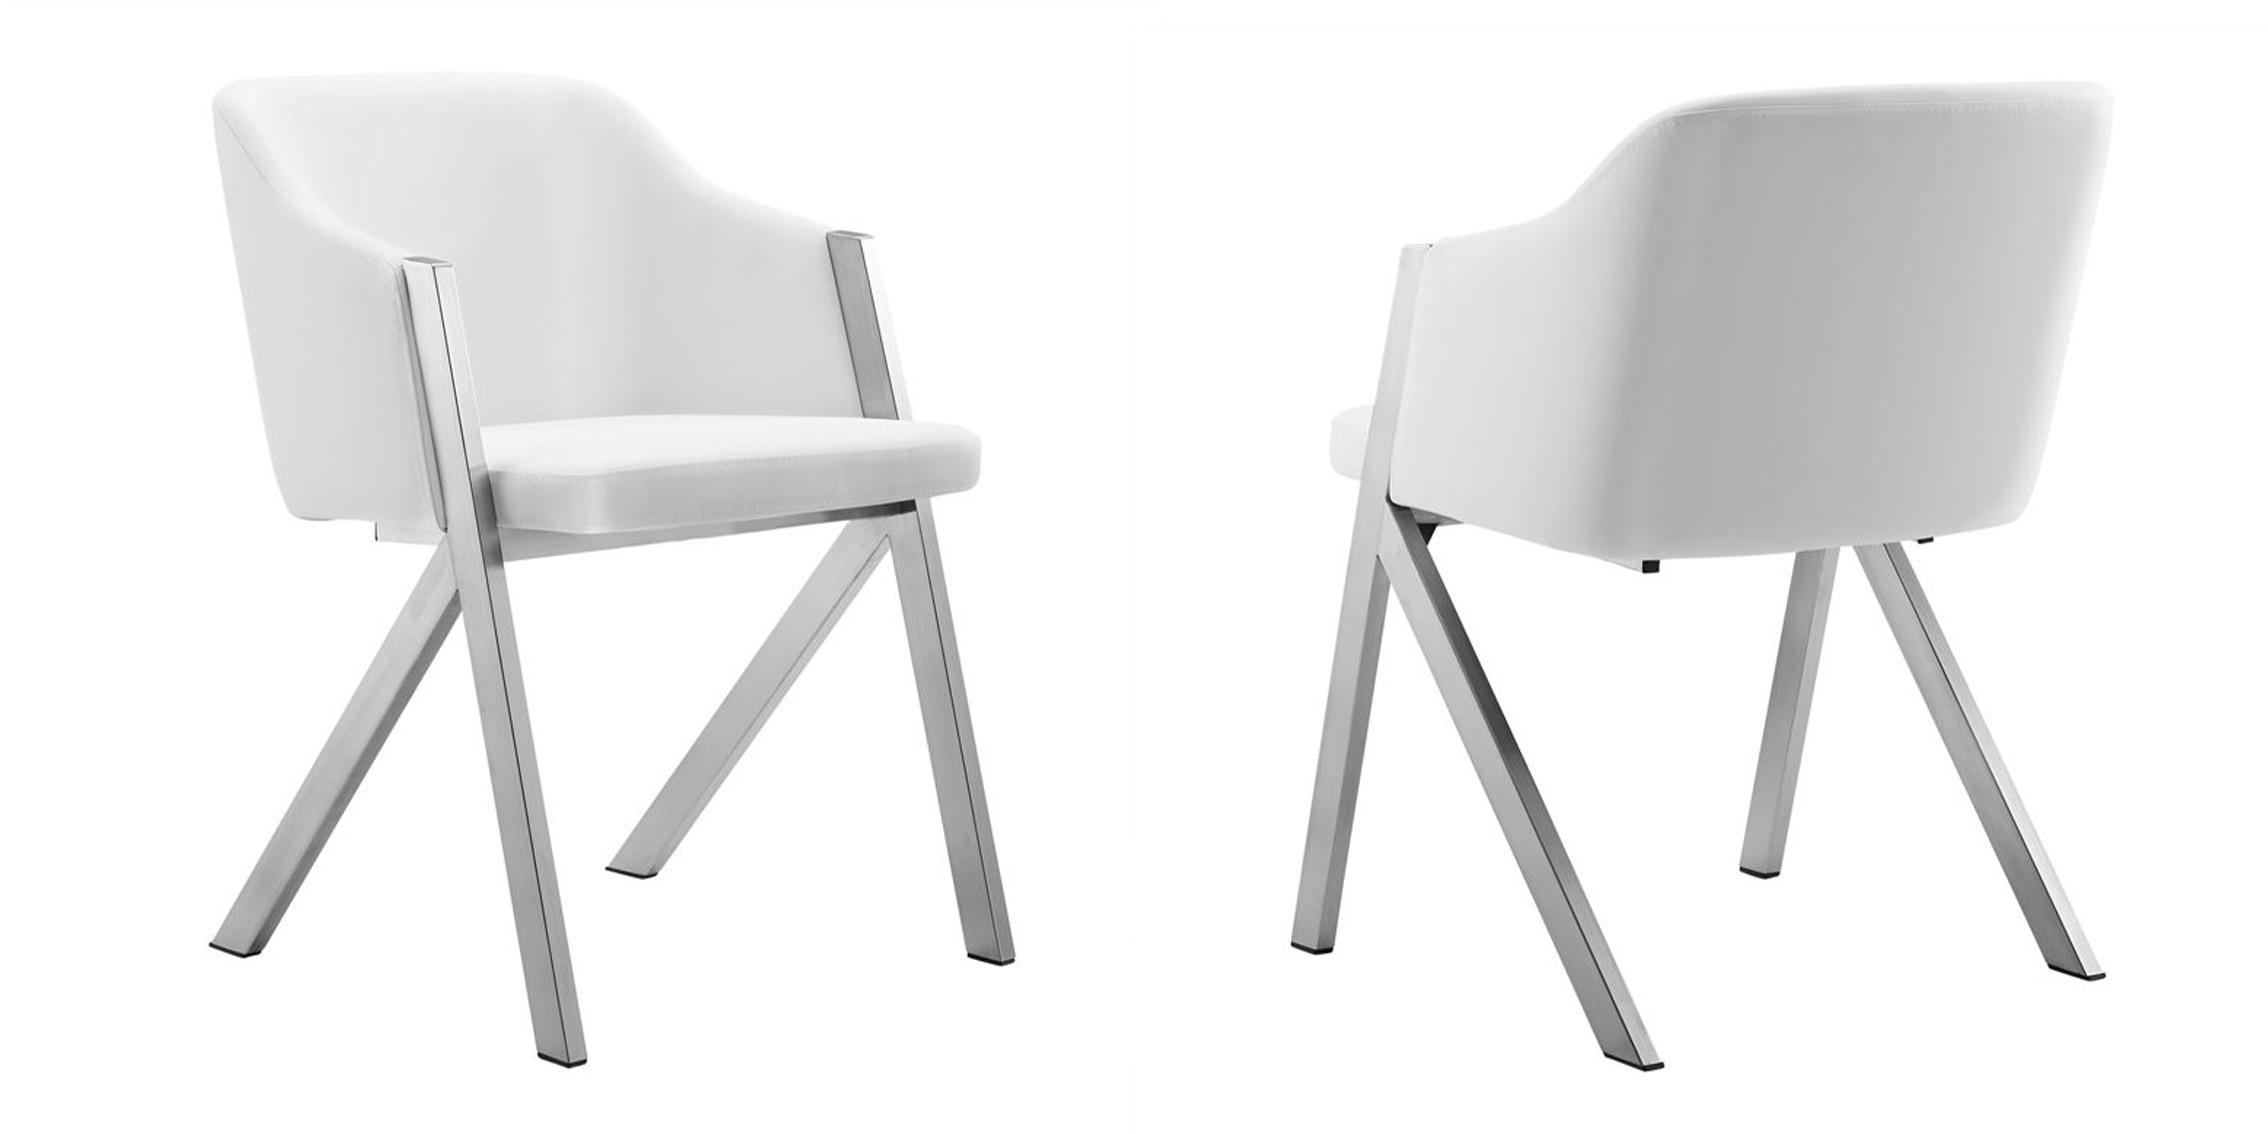 Contemporary, Modern Dining Chair Set VGEWF3202BF-WHT VGEWF3202BF-WHT in White Leatherette